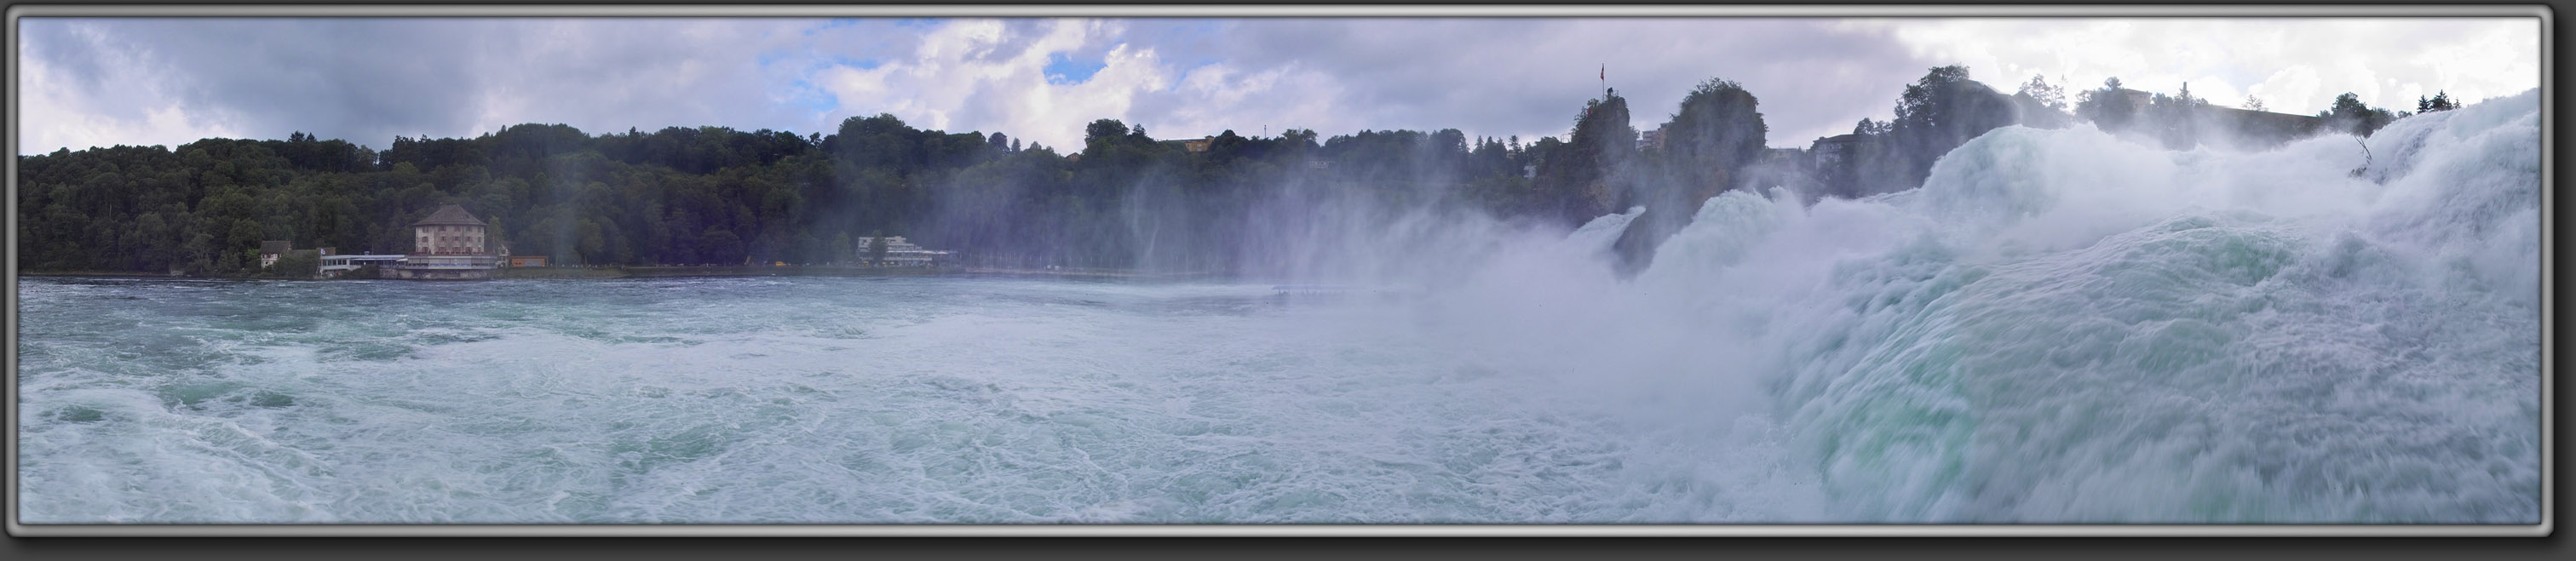 Rheinfall at the Water